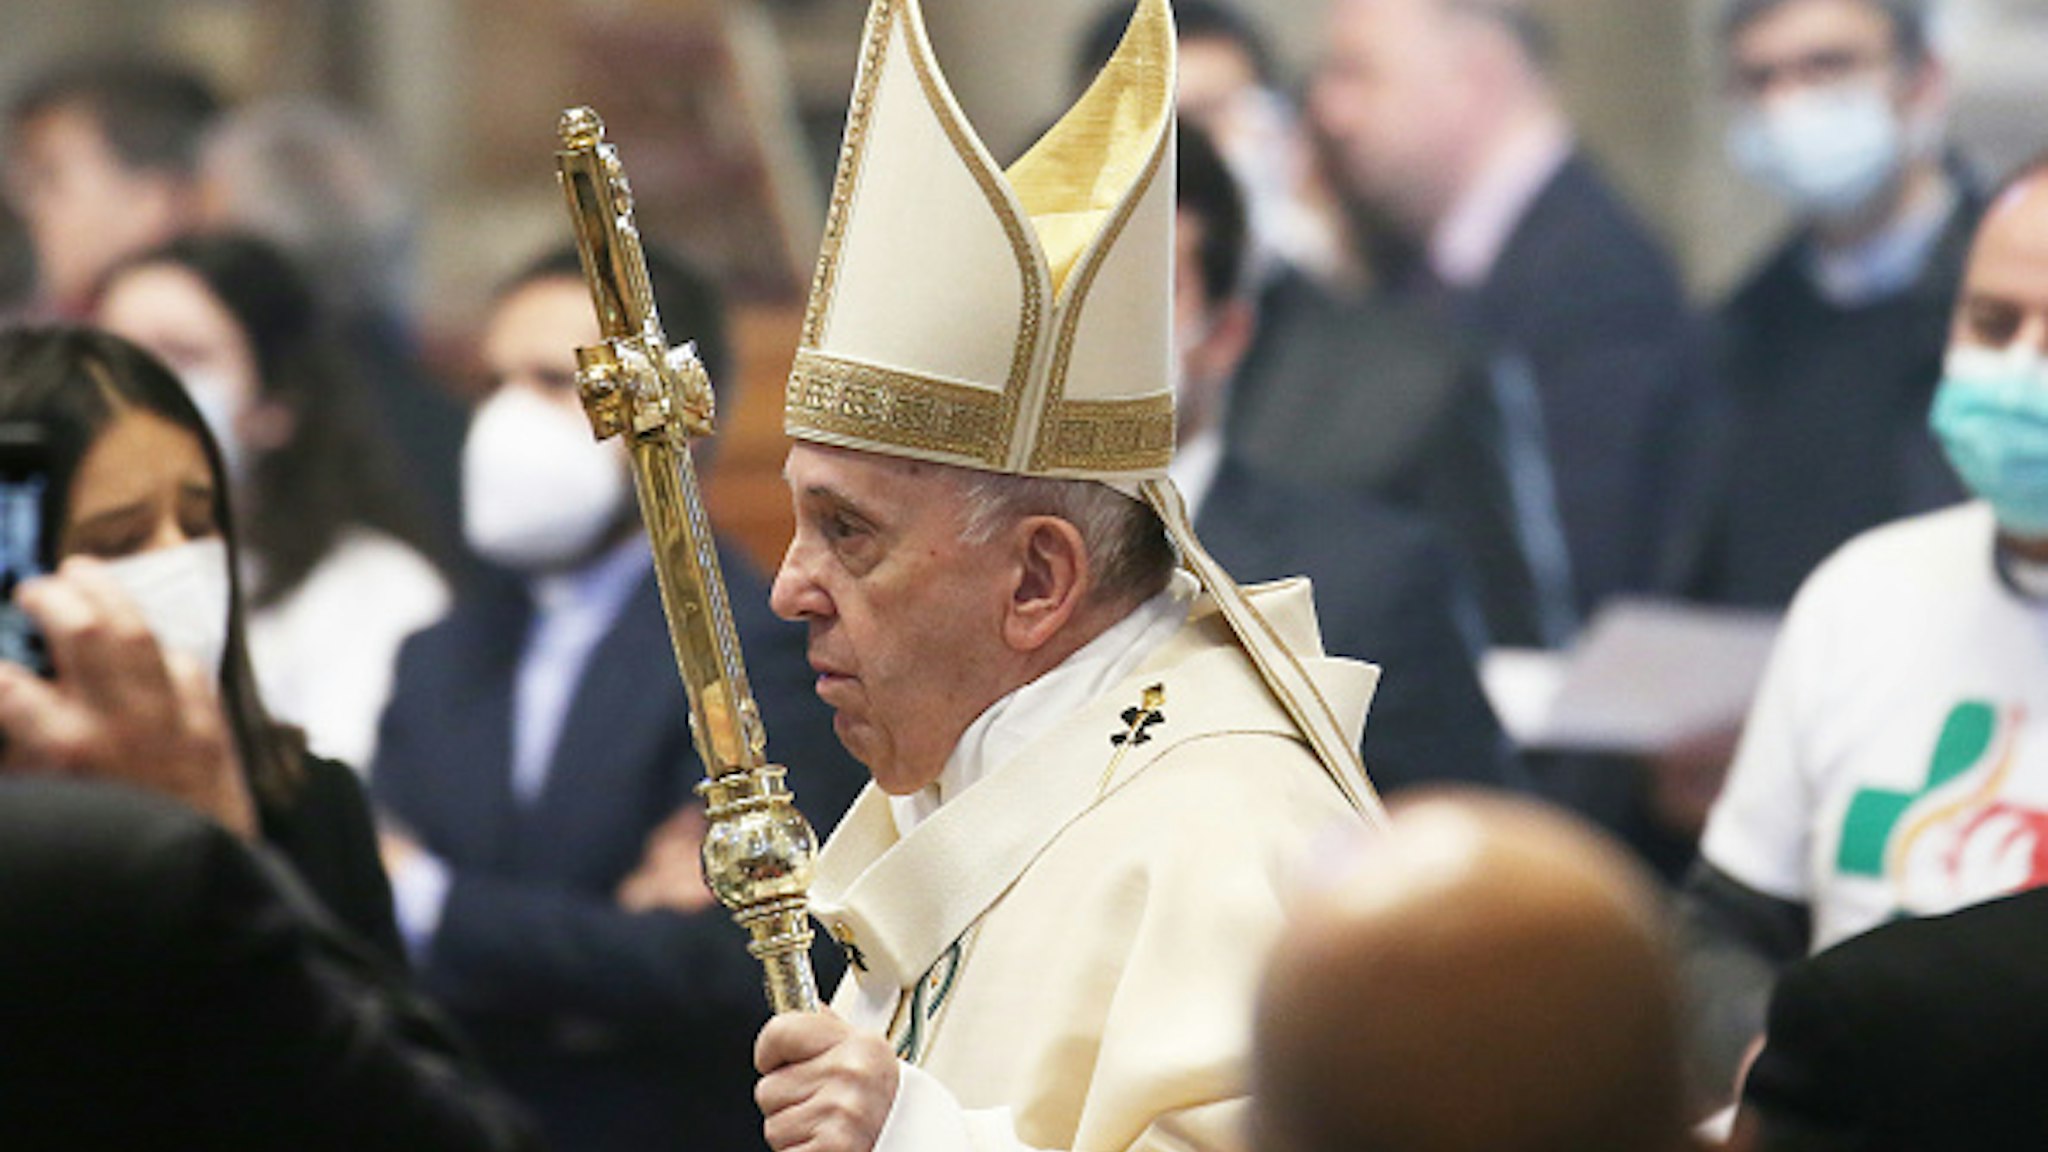 VATICAN CITY, VATICAN - NOVEMBER 22: Pope Francis holds Holy Mass on World Youth Day at St. Peter's Basilica on November 22, 2020 in Vatican City, Vatican.